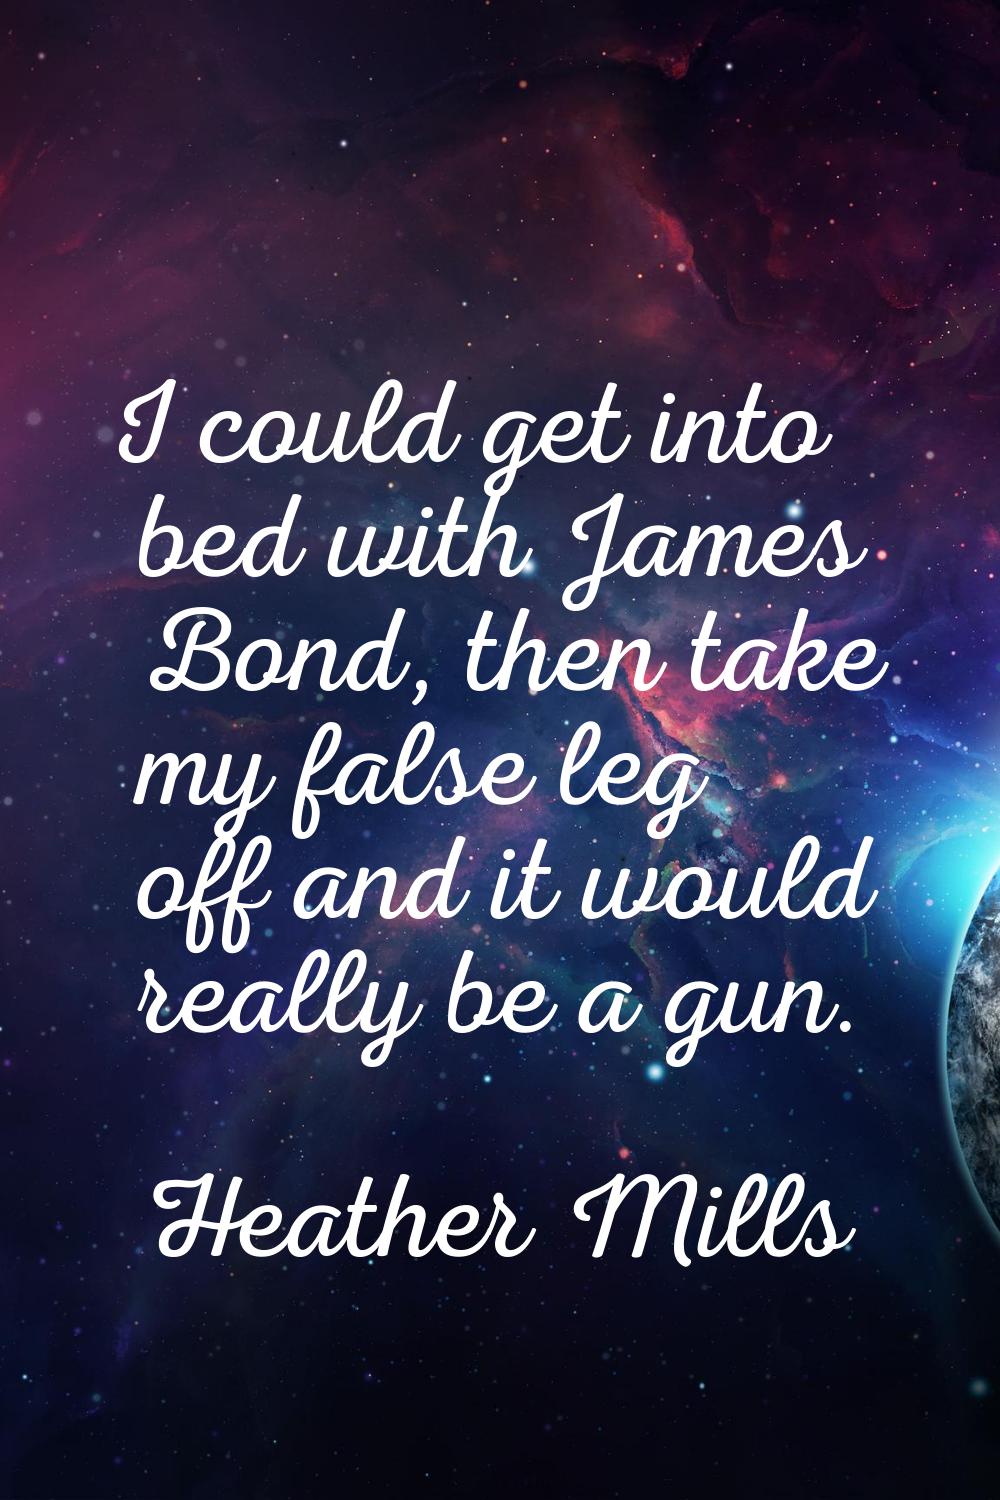 I could get into bed with James Bond, then take my false leg off and it would really be a gun.